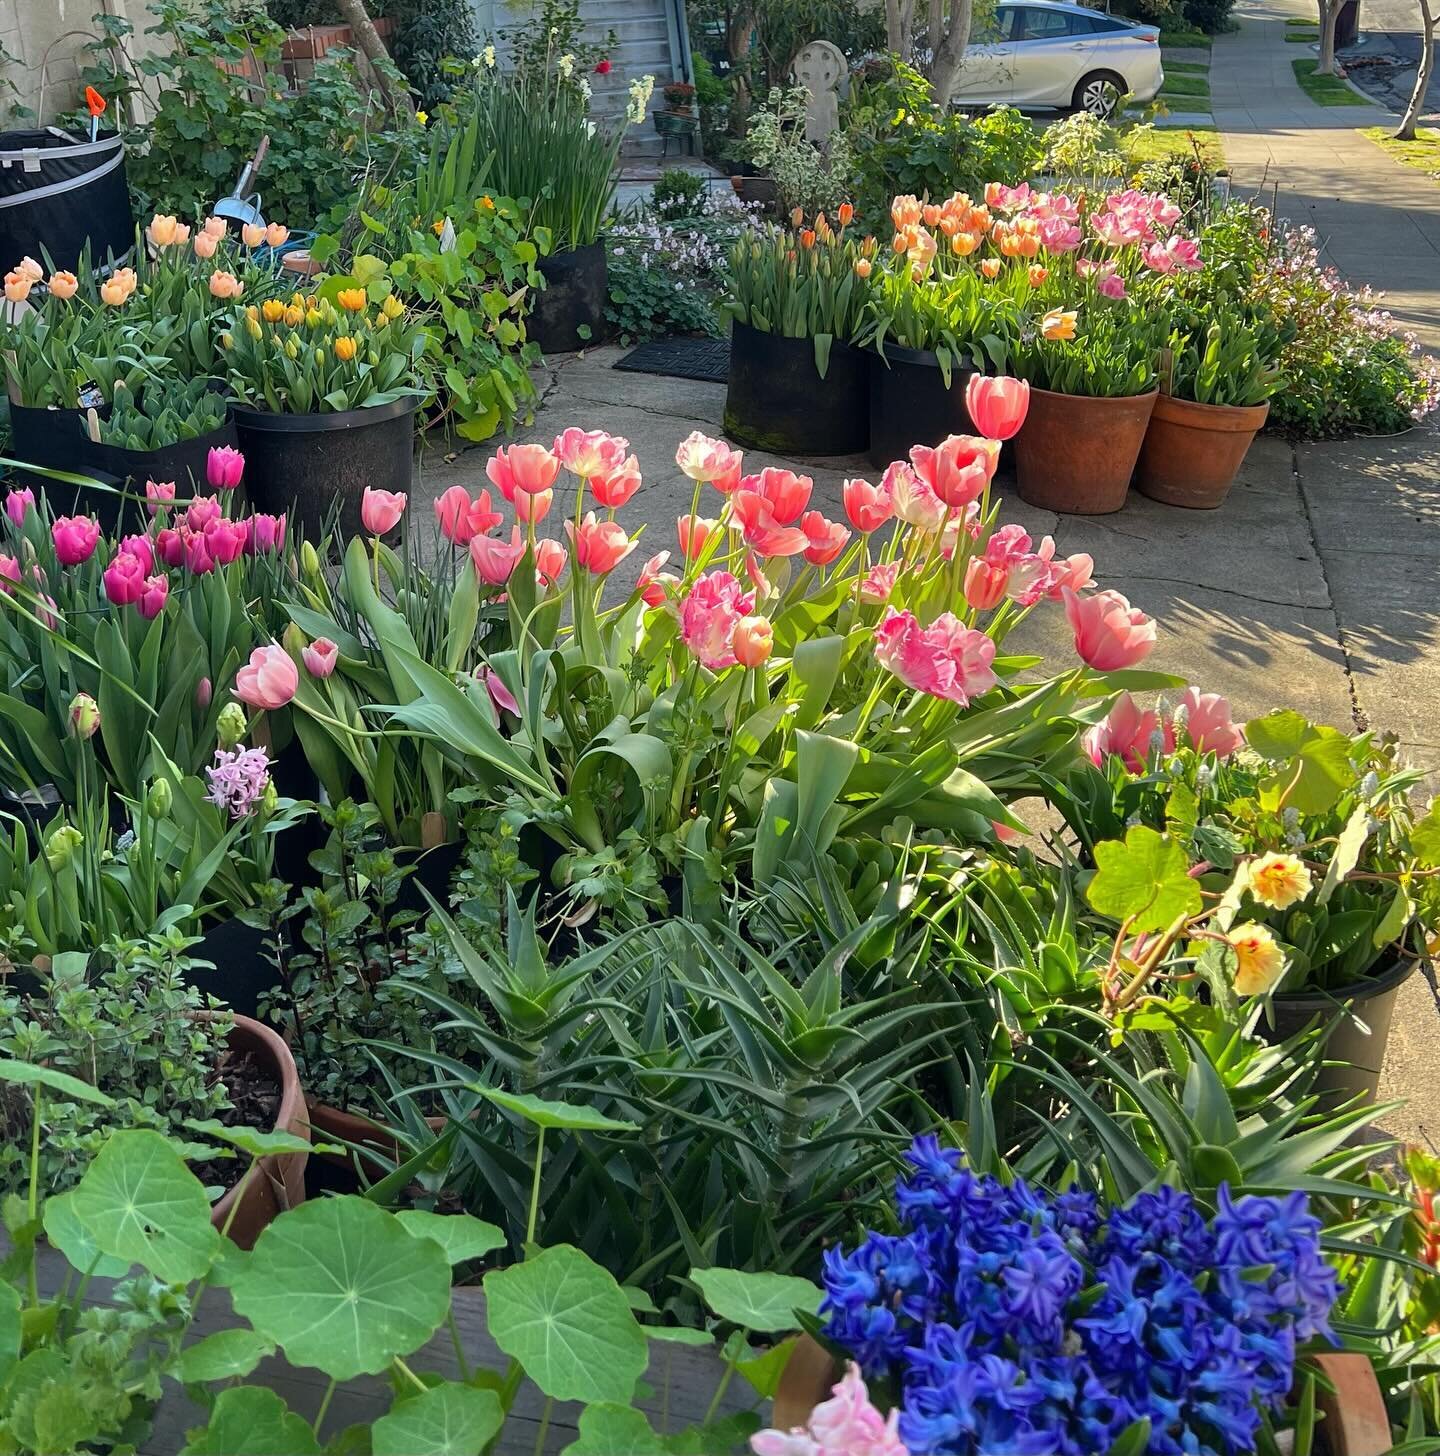 Cute view of the driveway tulip garden 🌷🌷🌷 Let me know if you&rsquo;d be interested in buying tulip bunches. Many are very special, out of the ordinary varieties grown from premium bulbs. Not my normal thing, but I&rsquo;d love to share some of th